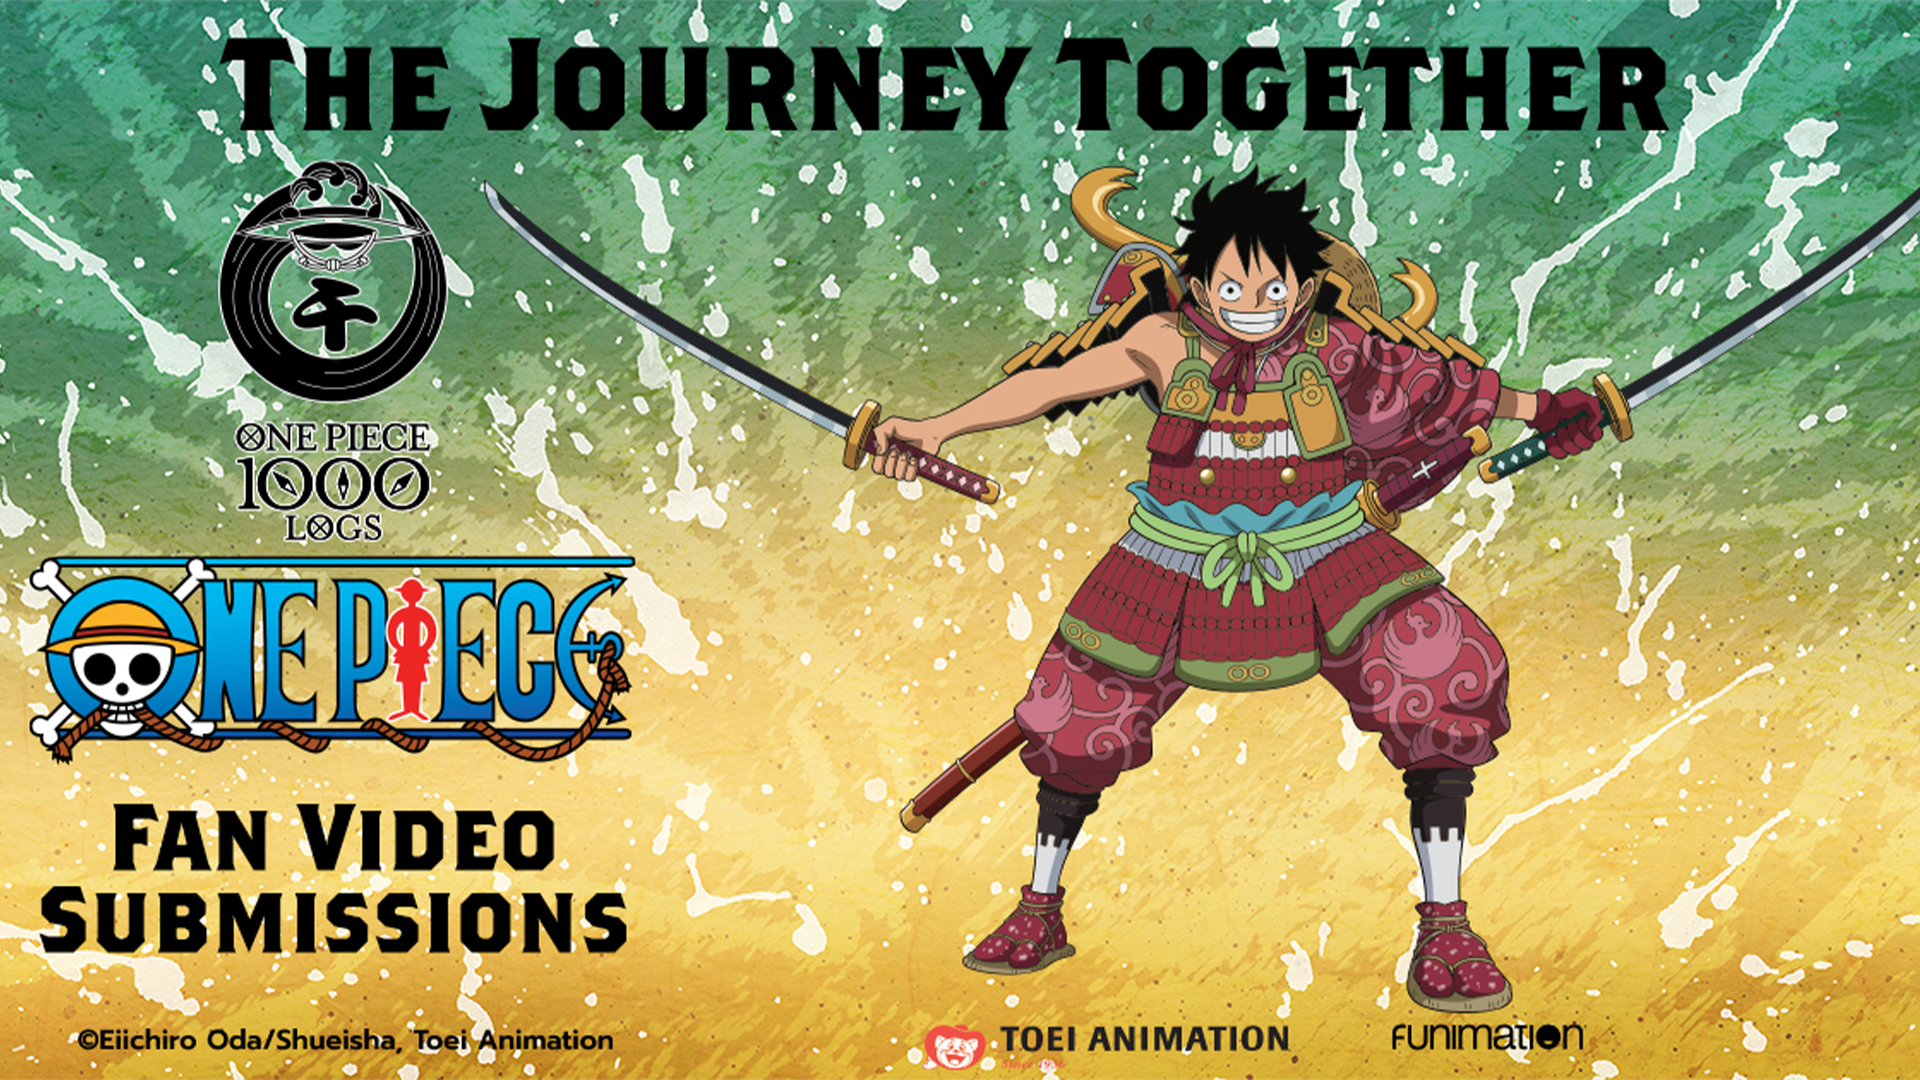 One Piece - THREE DAYS 'TIL 1000! Tune into Funimation's One Piece 1000  celebration to catch up with episodes 998-999 and learn how to make Luffy's  favorite food. Stream it here